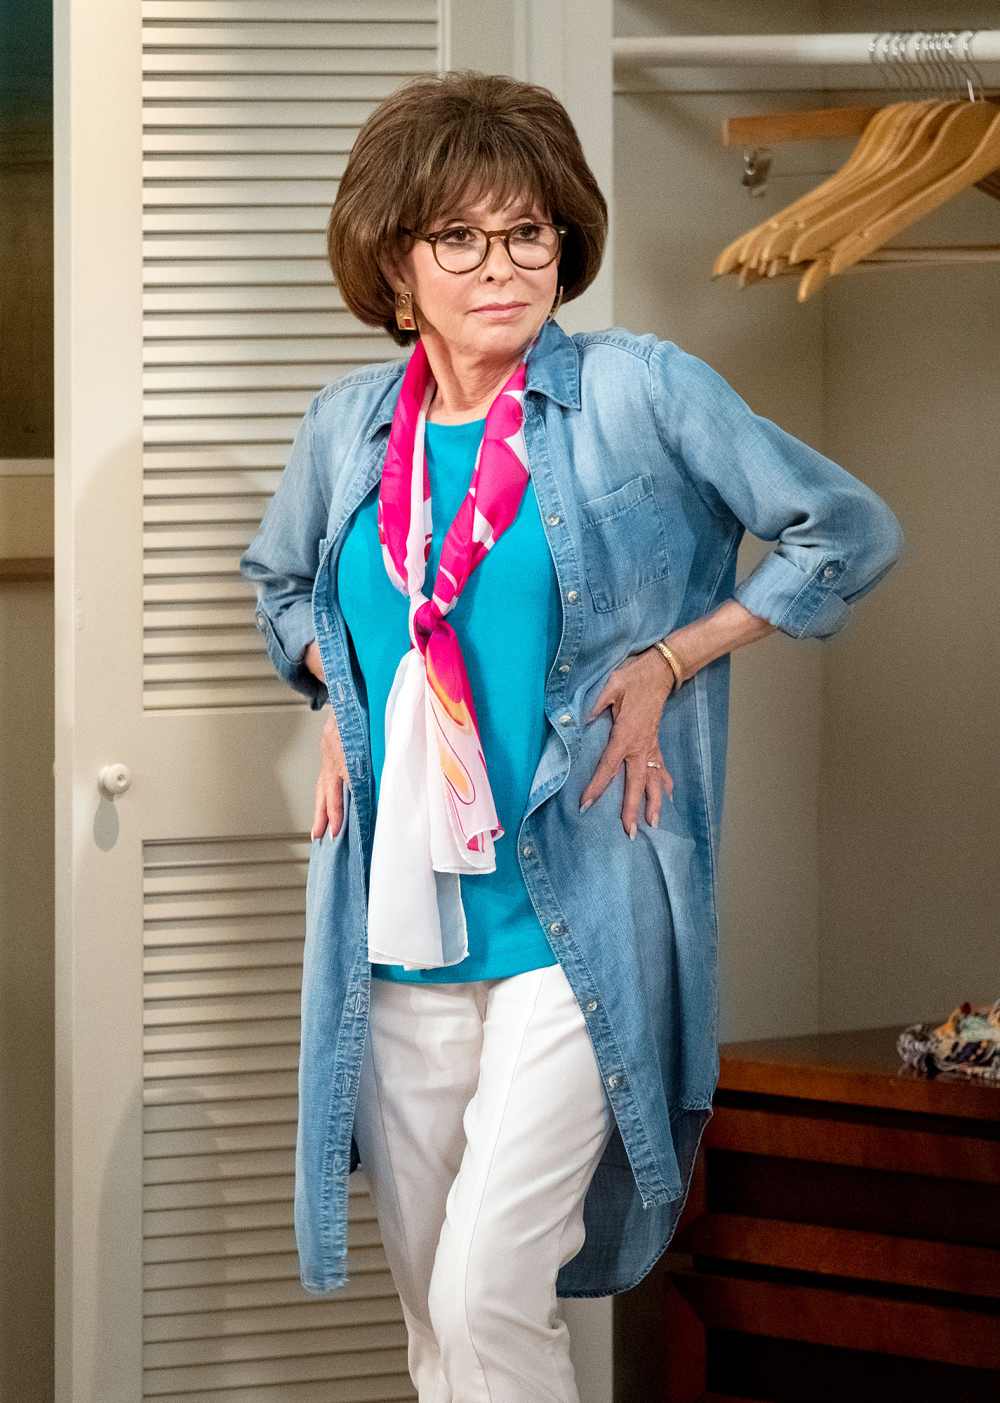 Rita Moreno in One Day At A Time 25 Things You Don't Know About Me